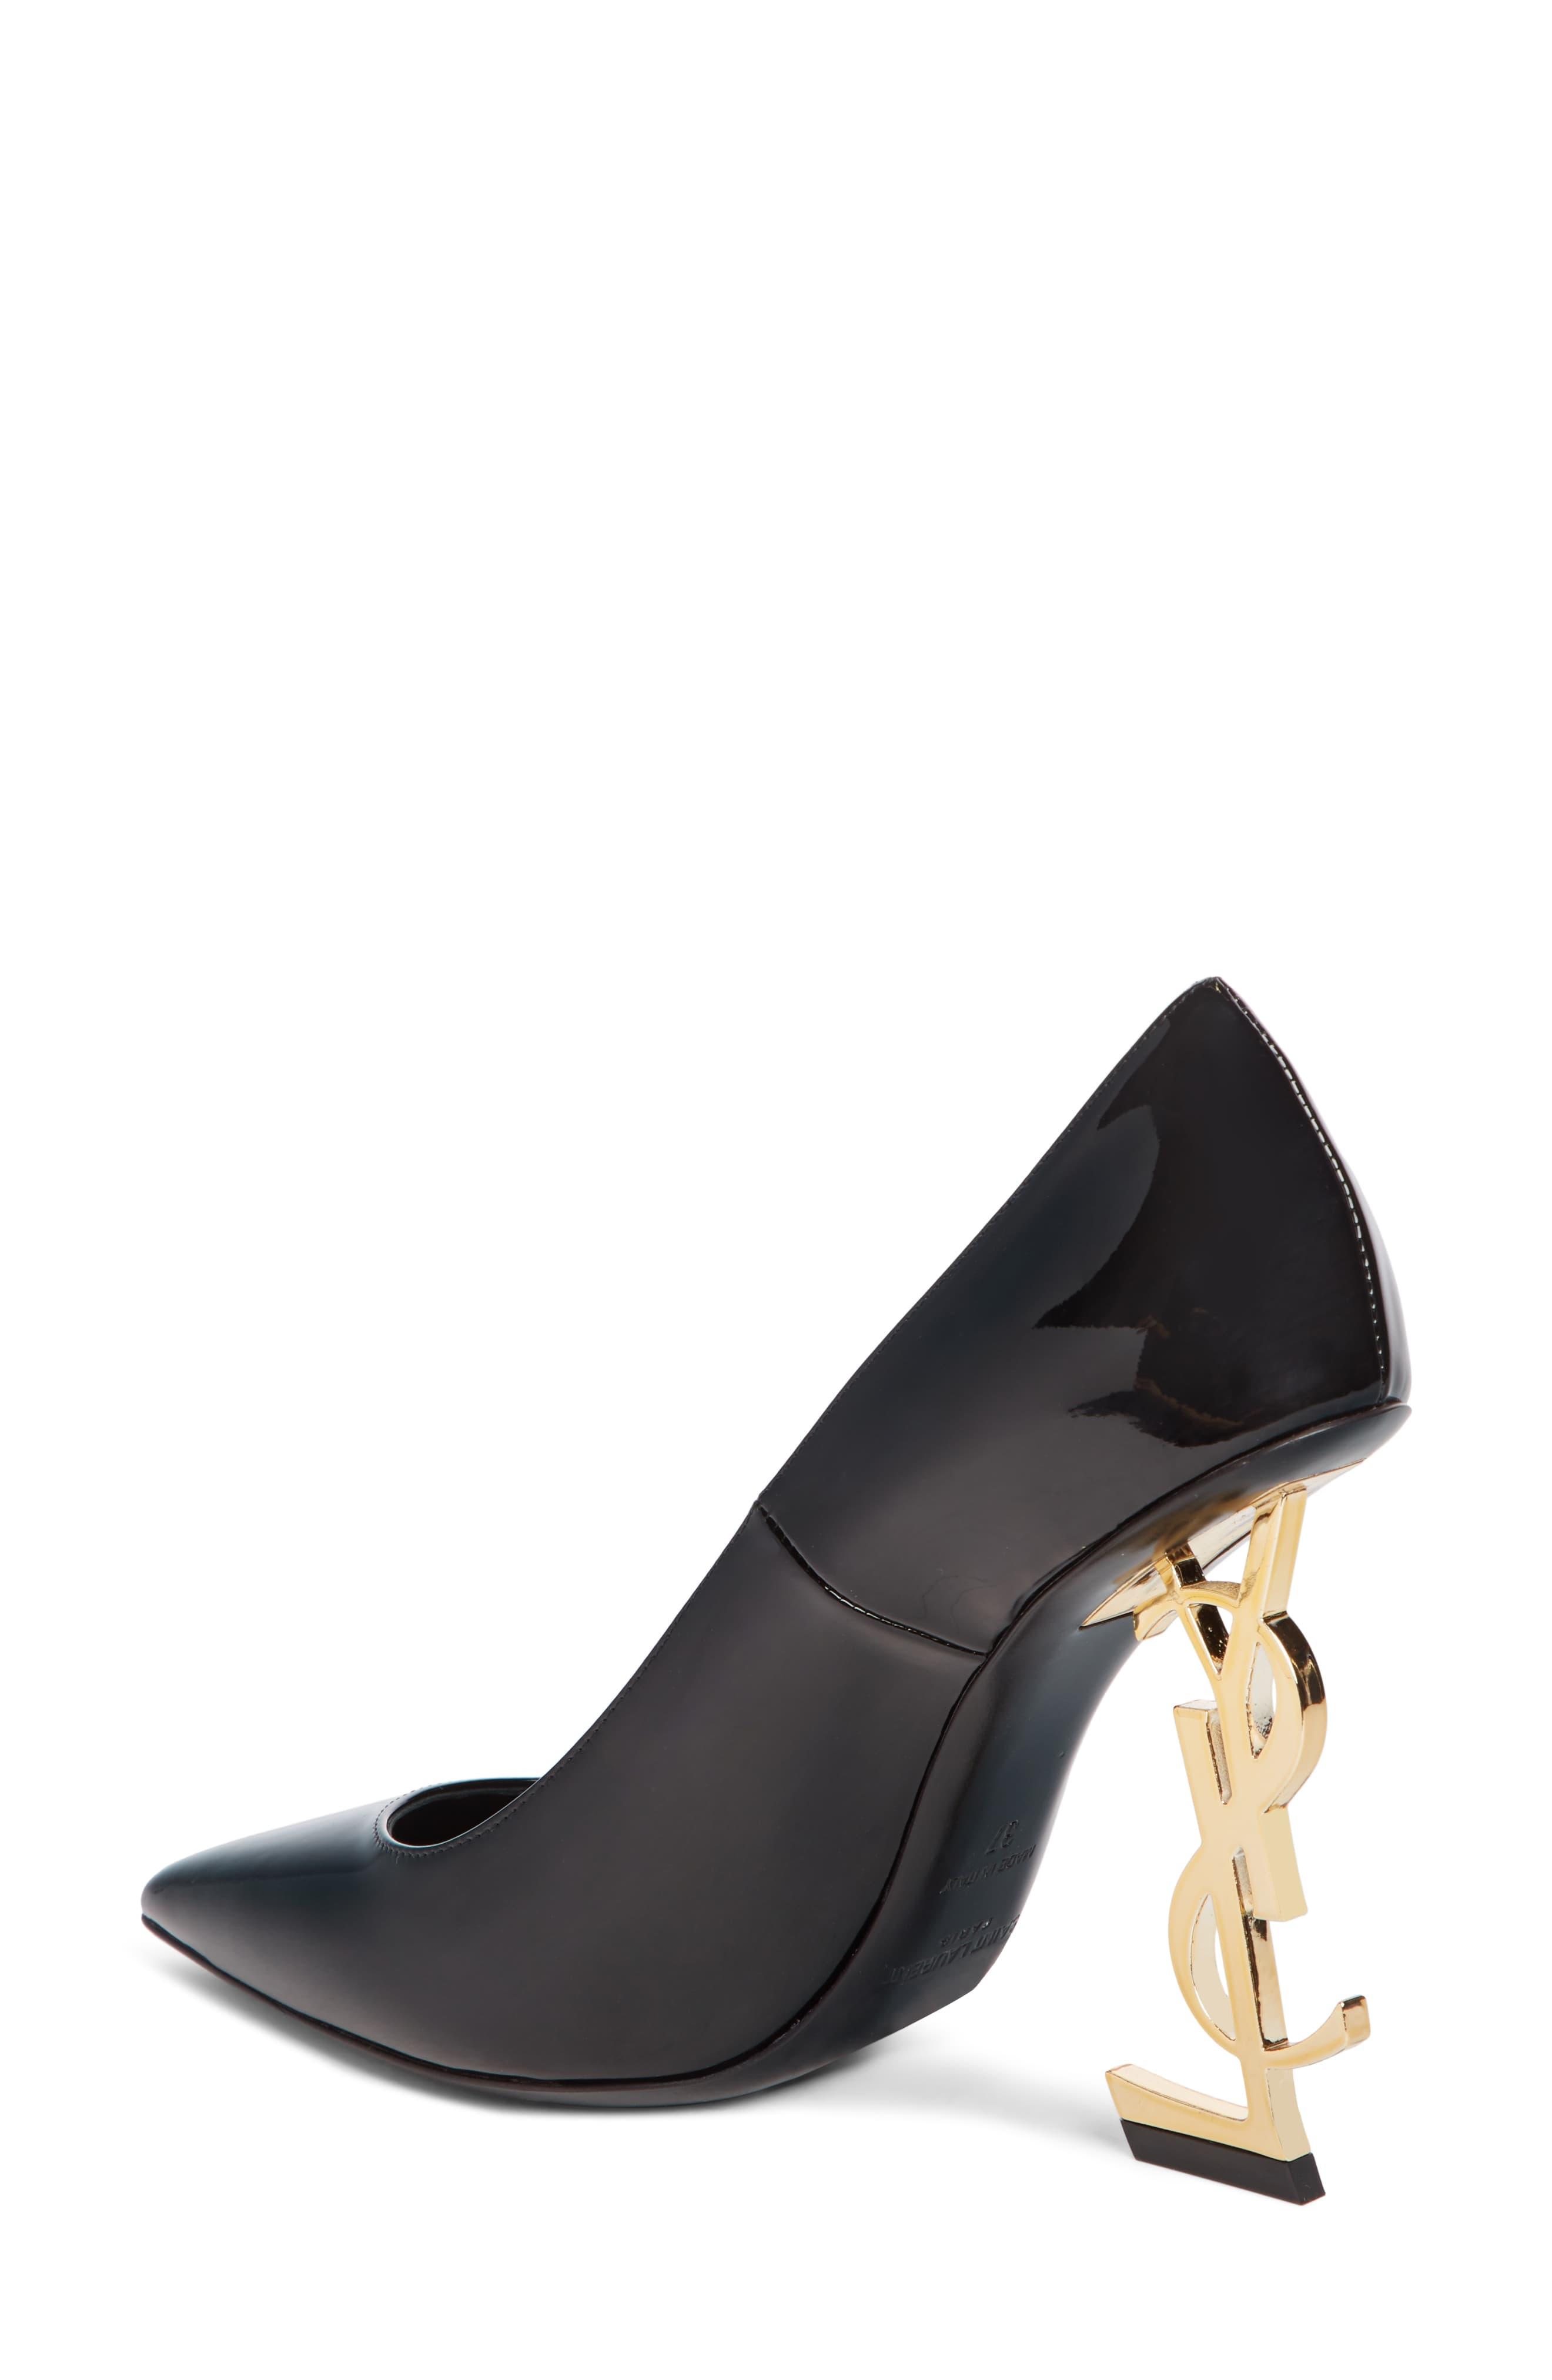 Saint Laurent Leather Opyum Ysl Pointed Toe Pump in Black Patent ...